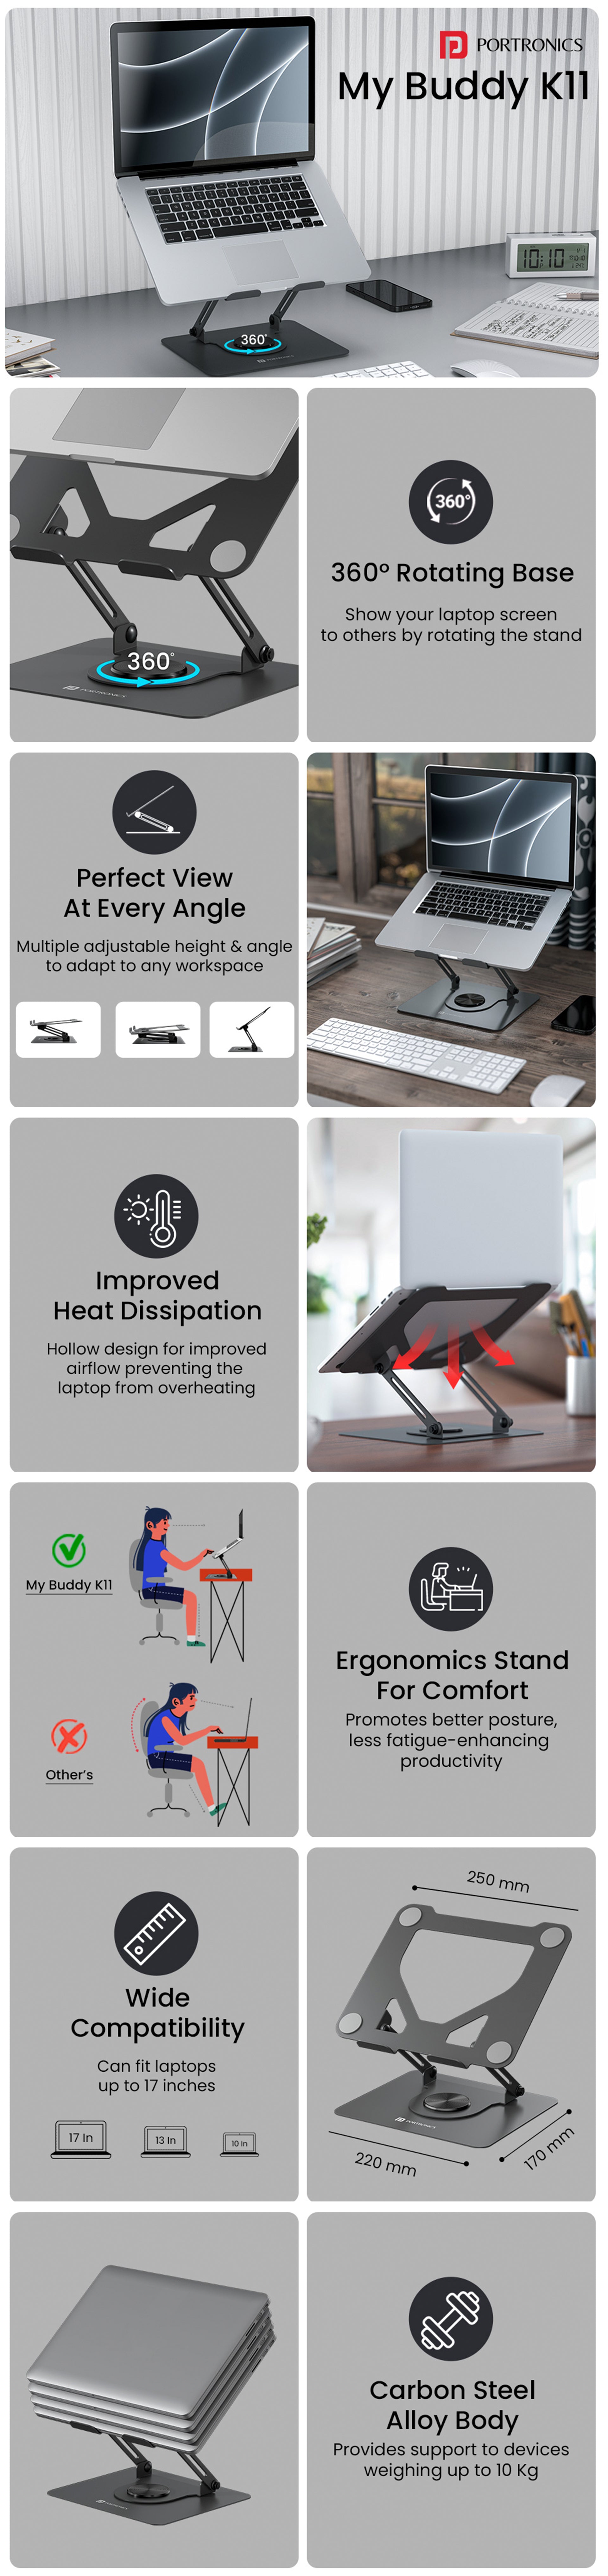 My Buddy K11 height adjustable laptop stand comes with anti-slip silicone pads to hold your laptop in place and keep them from falling while you work seamlessly and better position